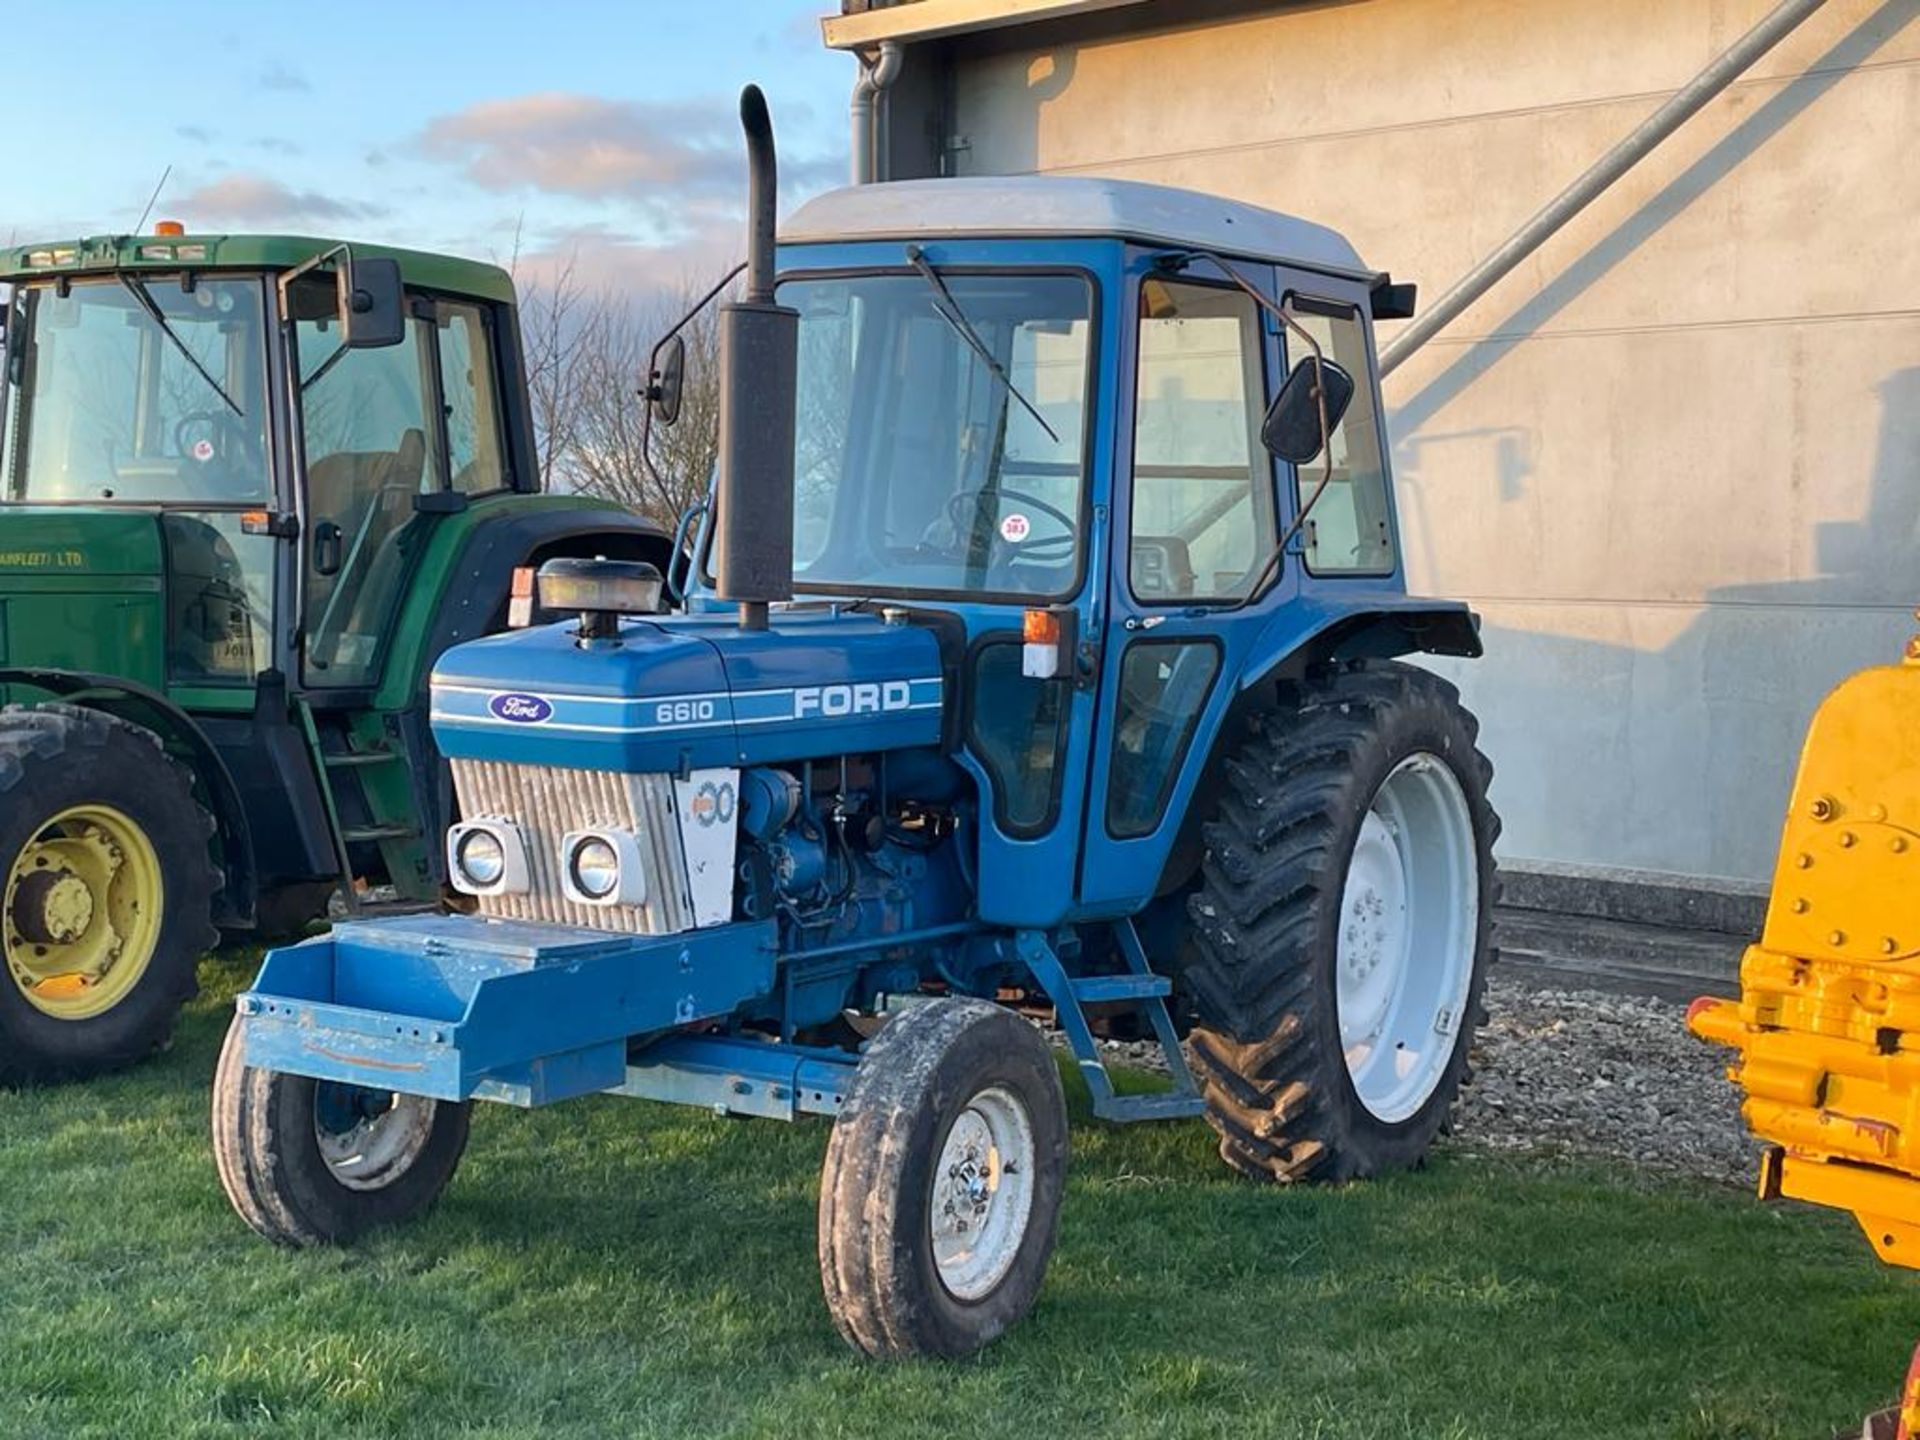 1982 Ford 6610 2 wheel drive Tractor, c/w Q cab, 13.6 R38 & 7.50 x 16 tyres. 6461 recorded hours.